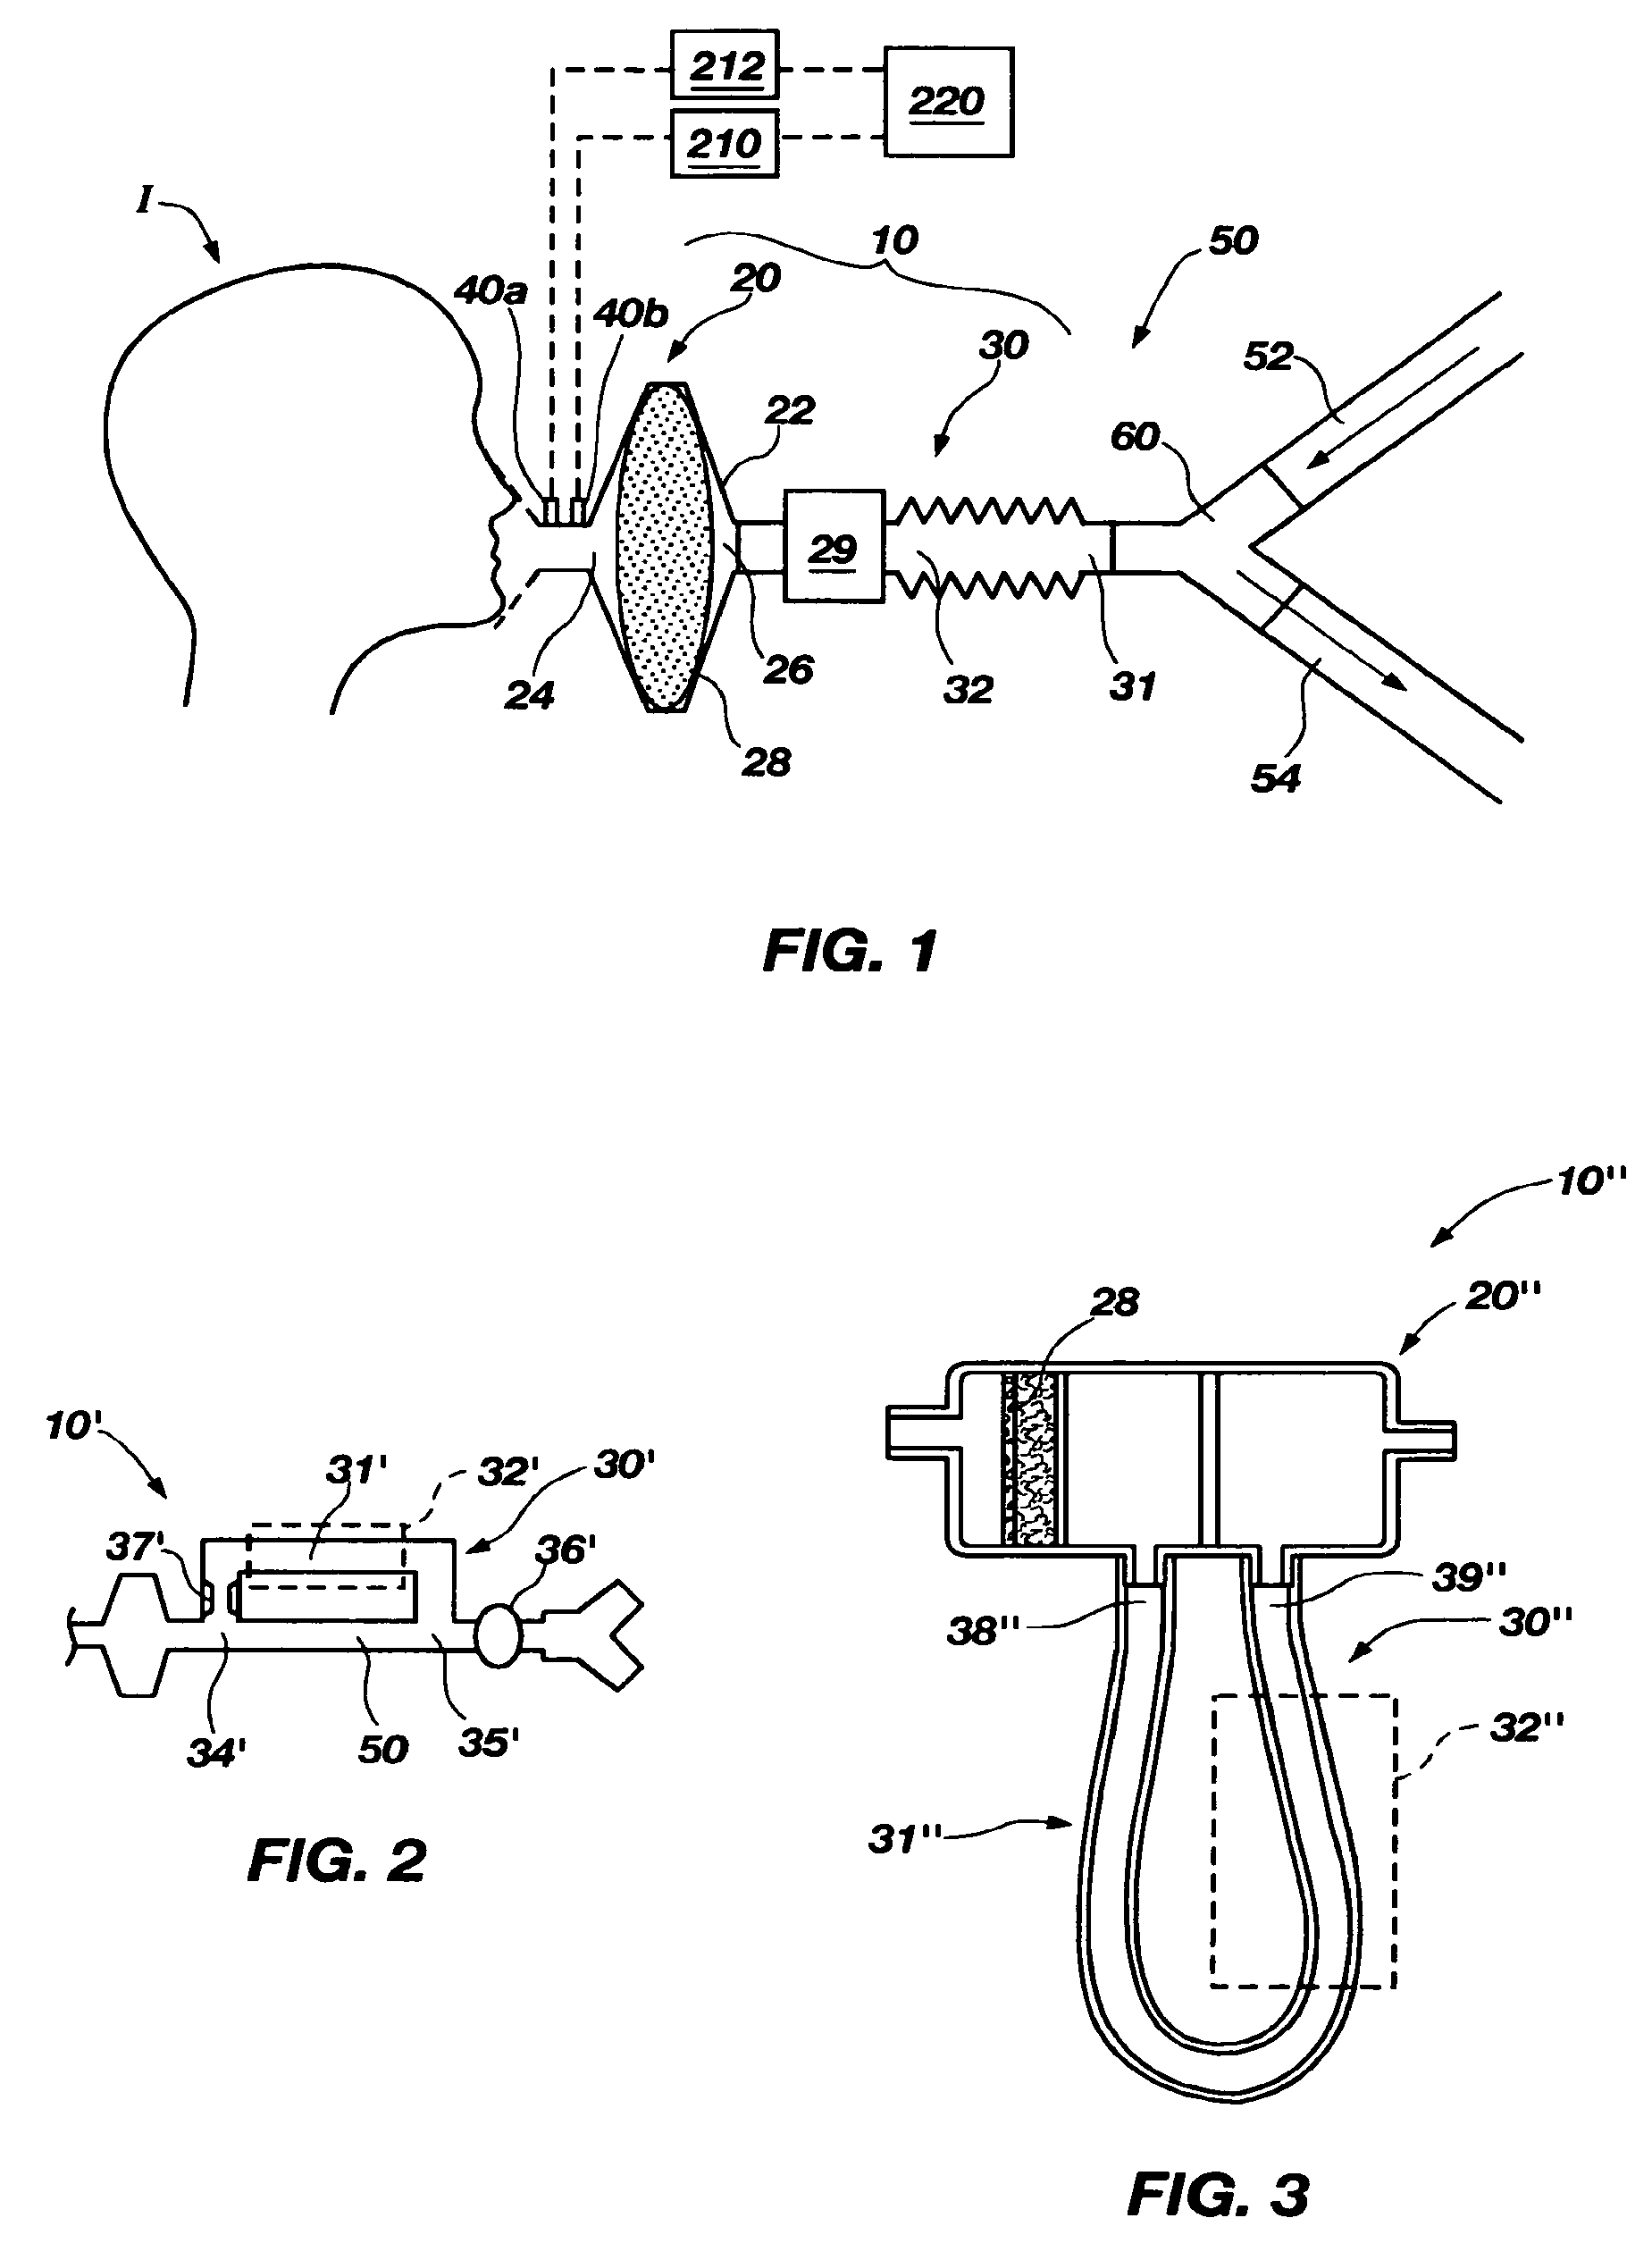 Apparatus and techniques for reducing the effects of general anesthetics